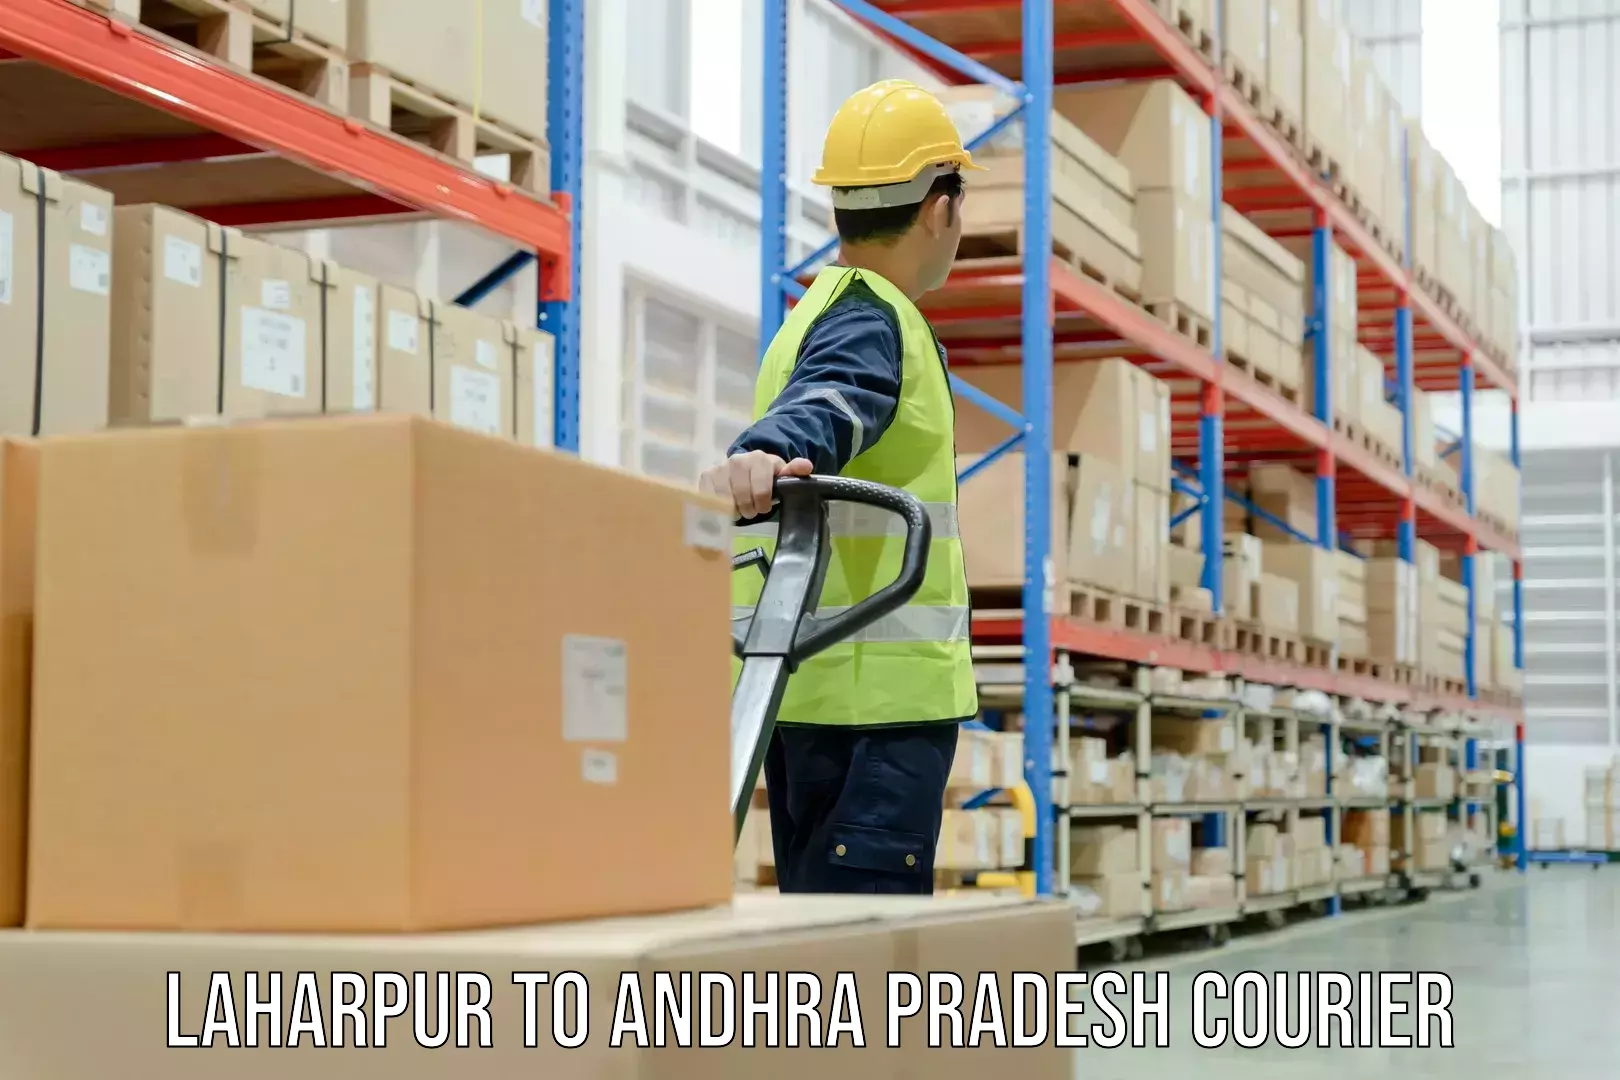 Efficient package consolidation Laharpur to Gollaprollu